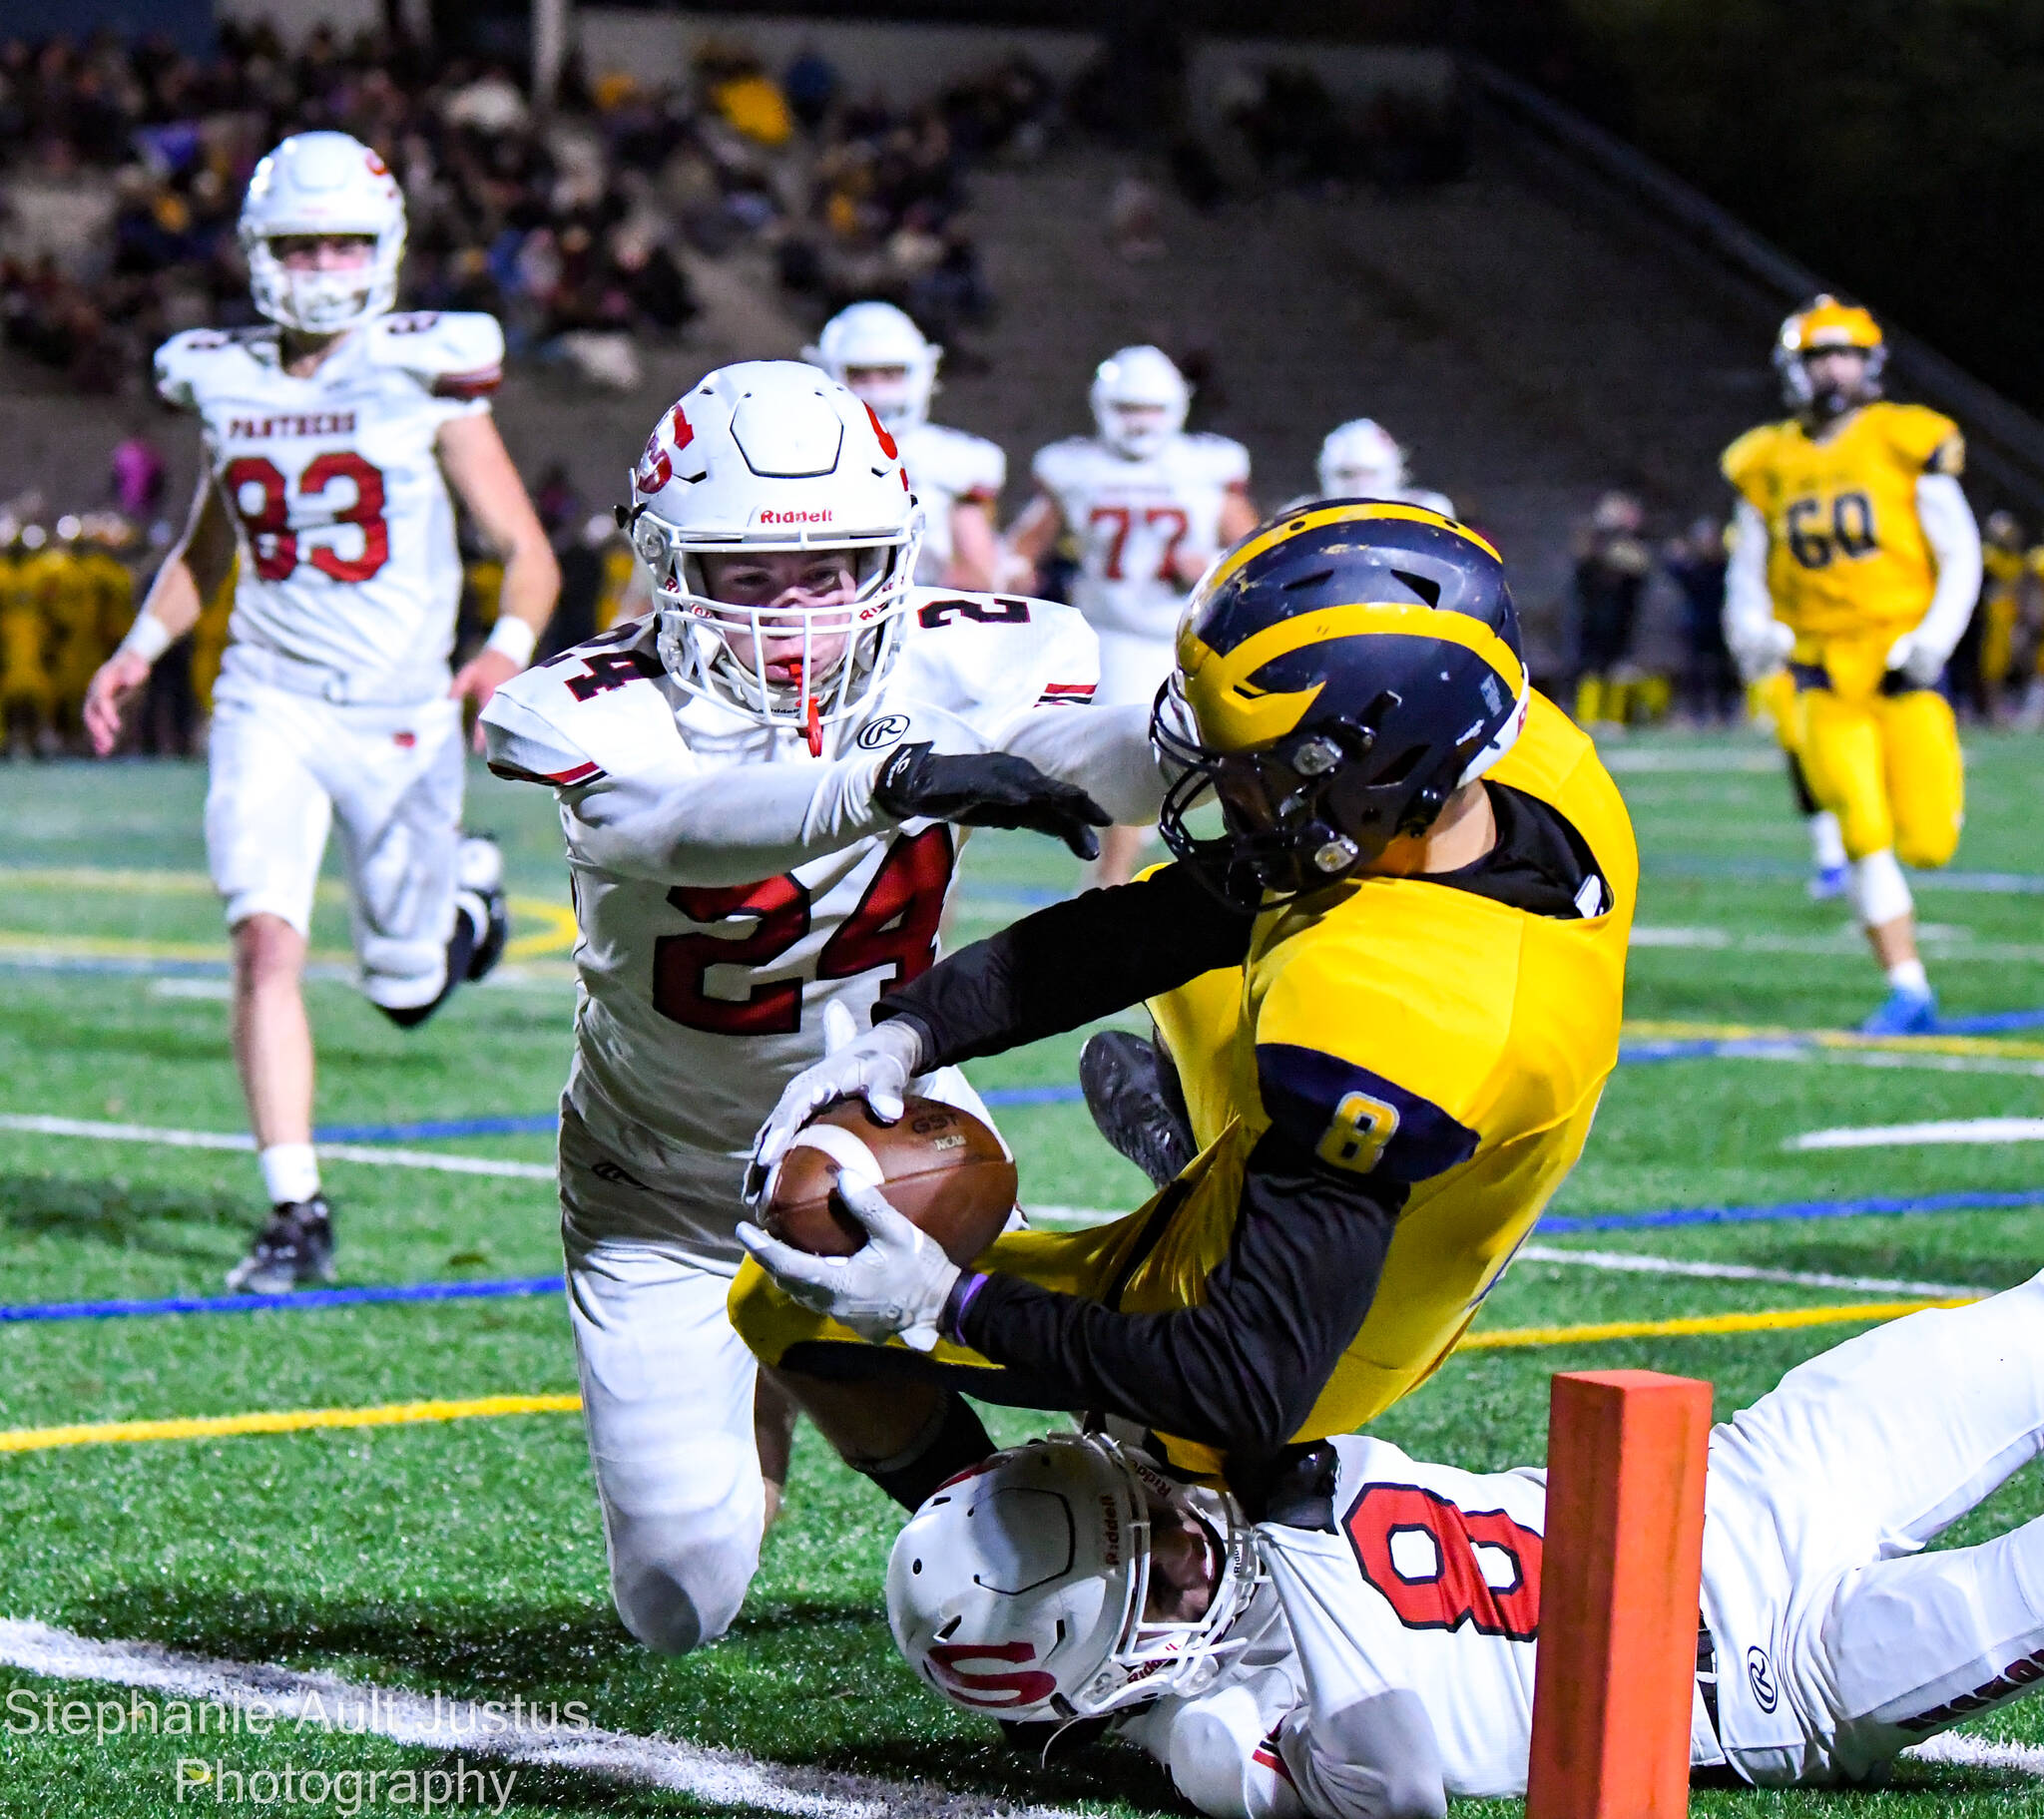 Bellevue junior Cal Zimmerman (#8) scores a touchdown as Snohomish seniors Miles Lamb (#8) and Easton Leonard (#24) attempt to tackle. November 4, 2022. Courtesy of Stephanie Ault Justus.